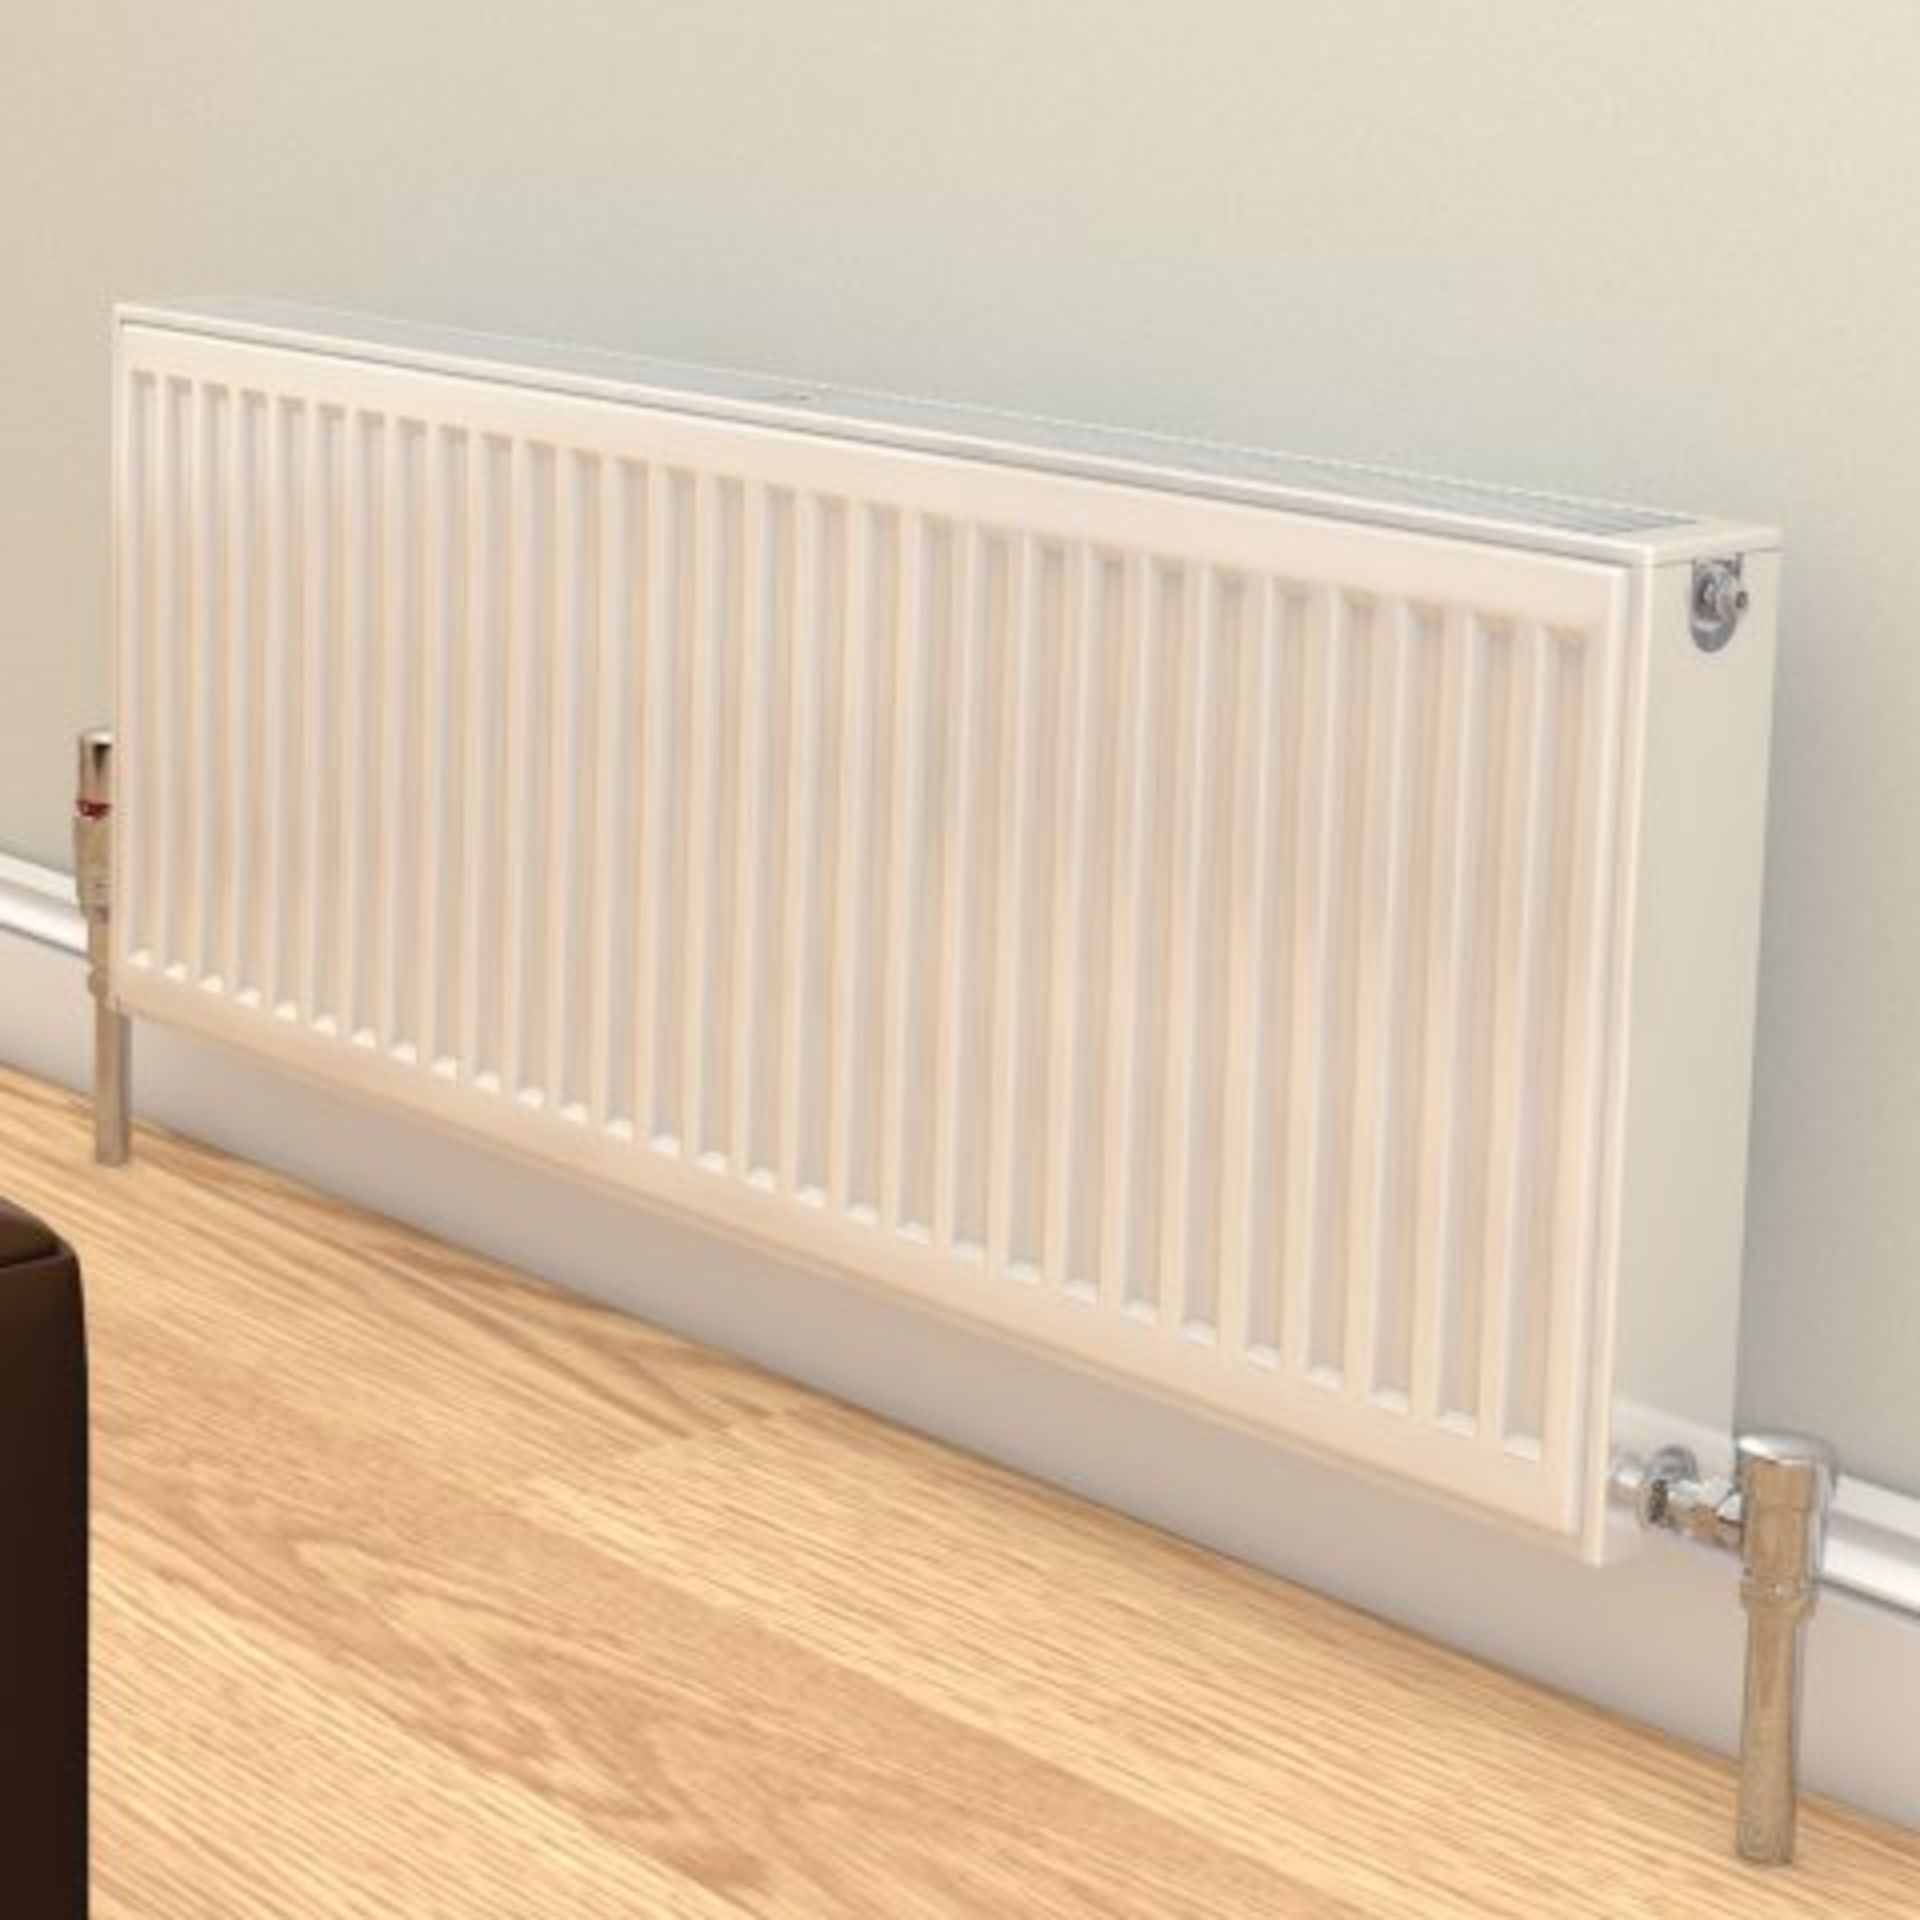 (H167) 500x800mm White Vita Compact Horizontal Radiator K2. RRP £199.99. Our range is perfect for - Image 2 of 3